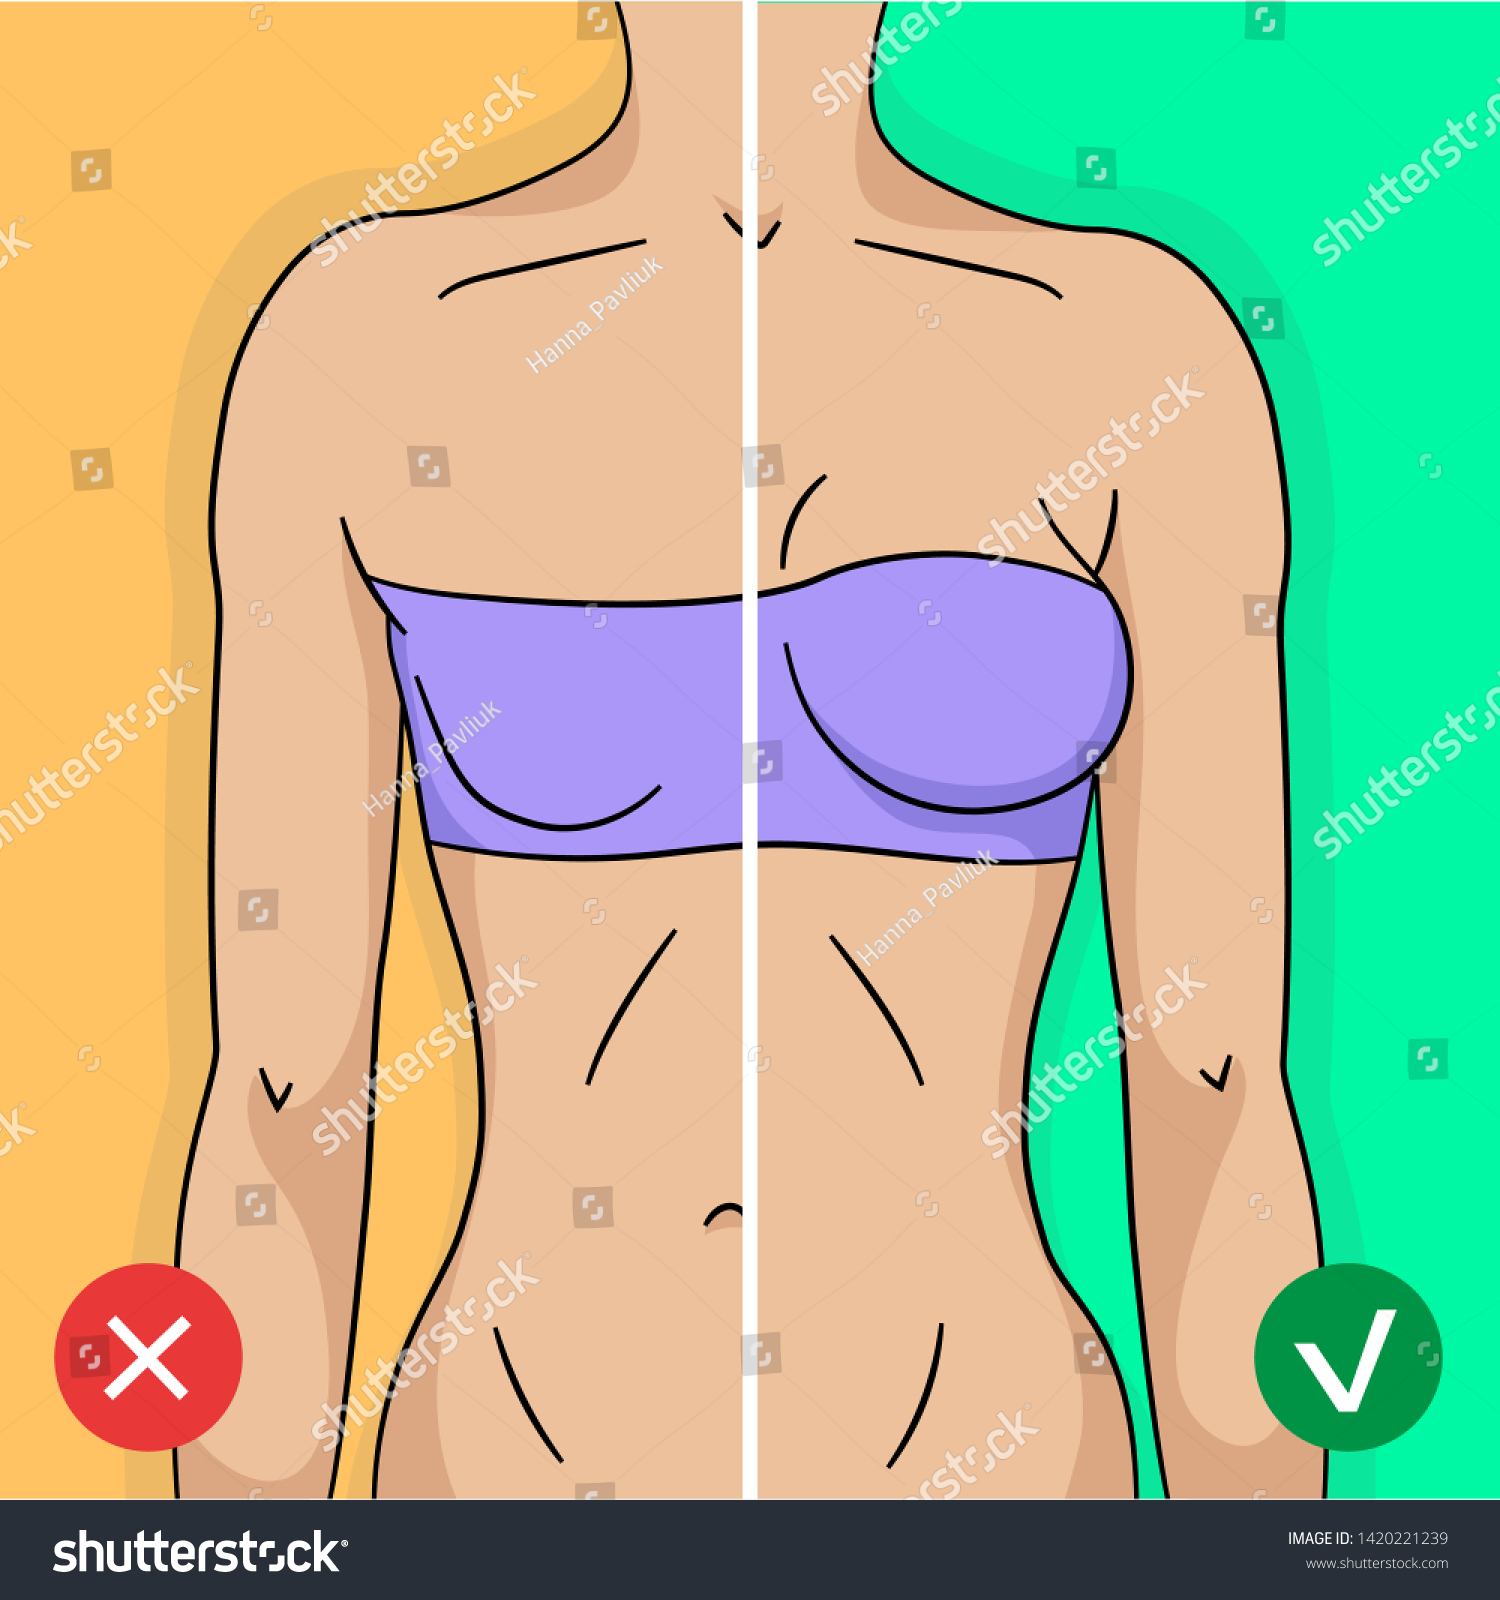 Comparison Woman Breast Before After Training Stock Vector Royalty Free 1420221239 